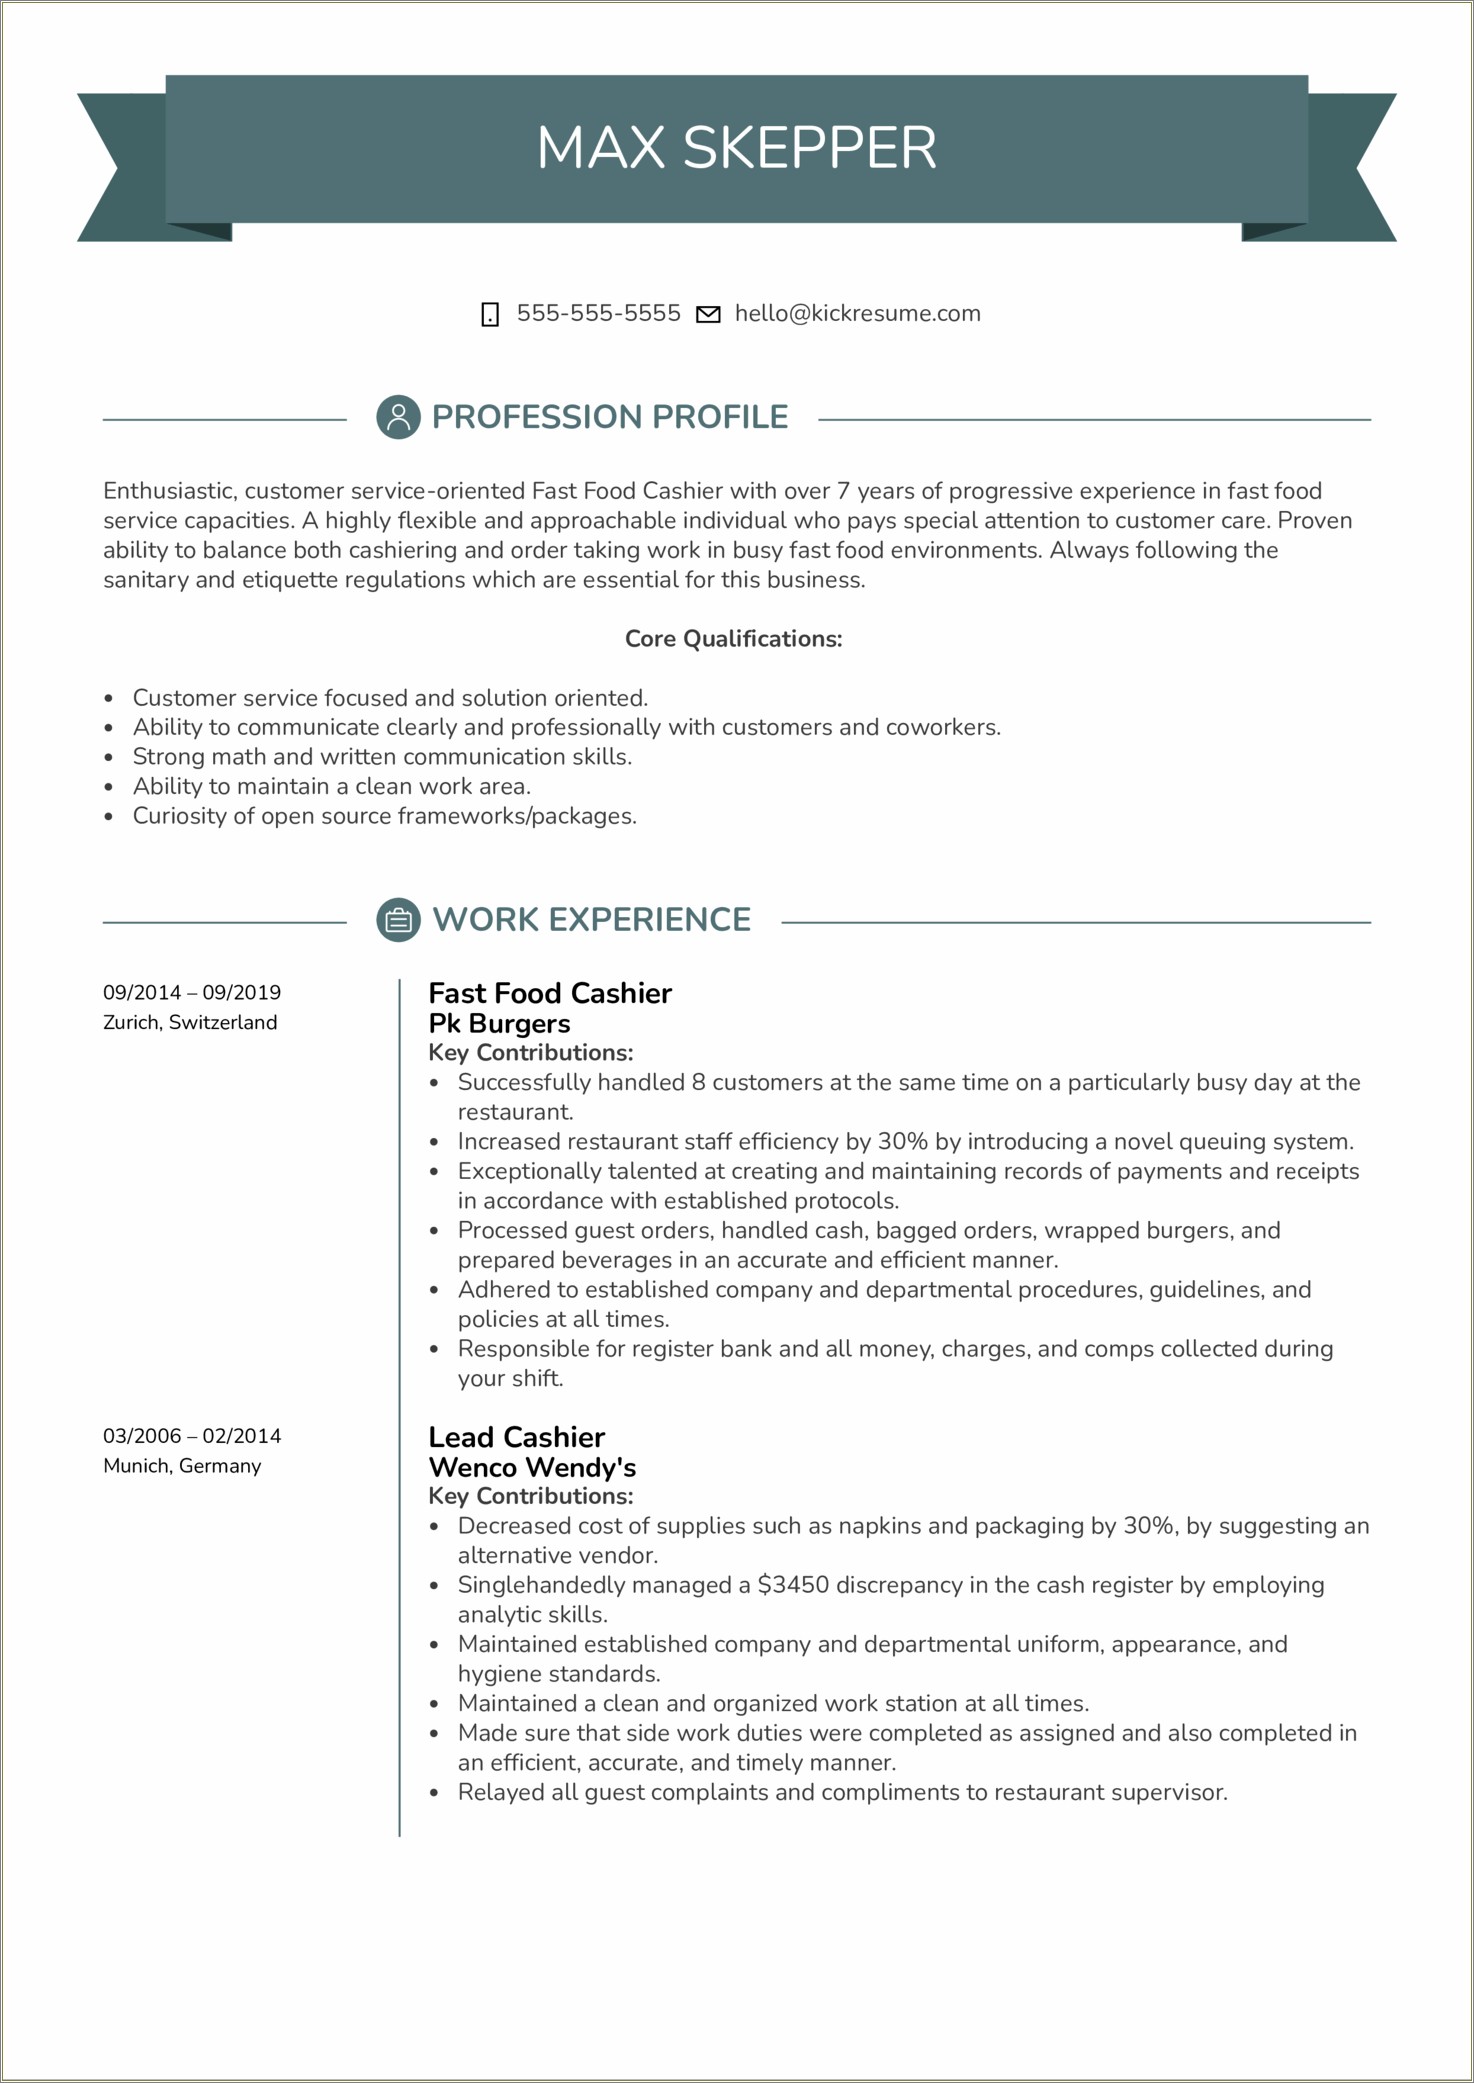 Resume Objective For Student With Fast Food Skills